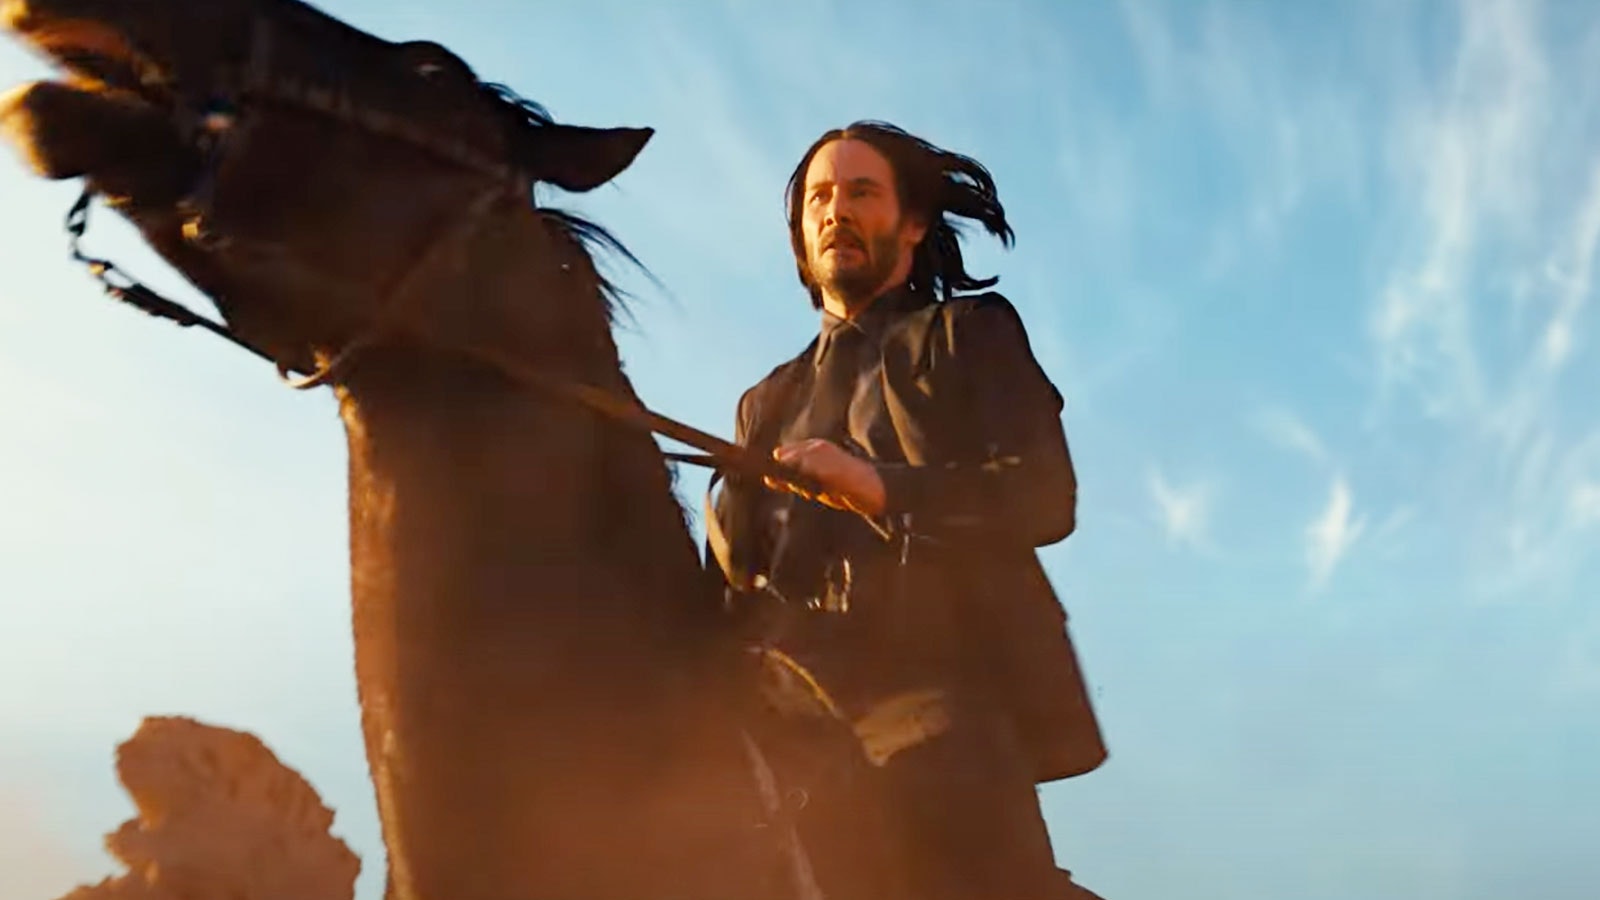 john wick 5 trailer is already out?!?!(I think)